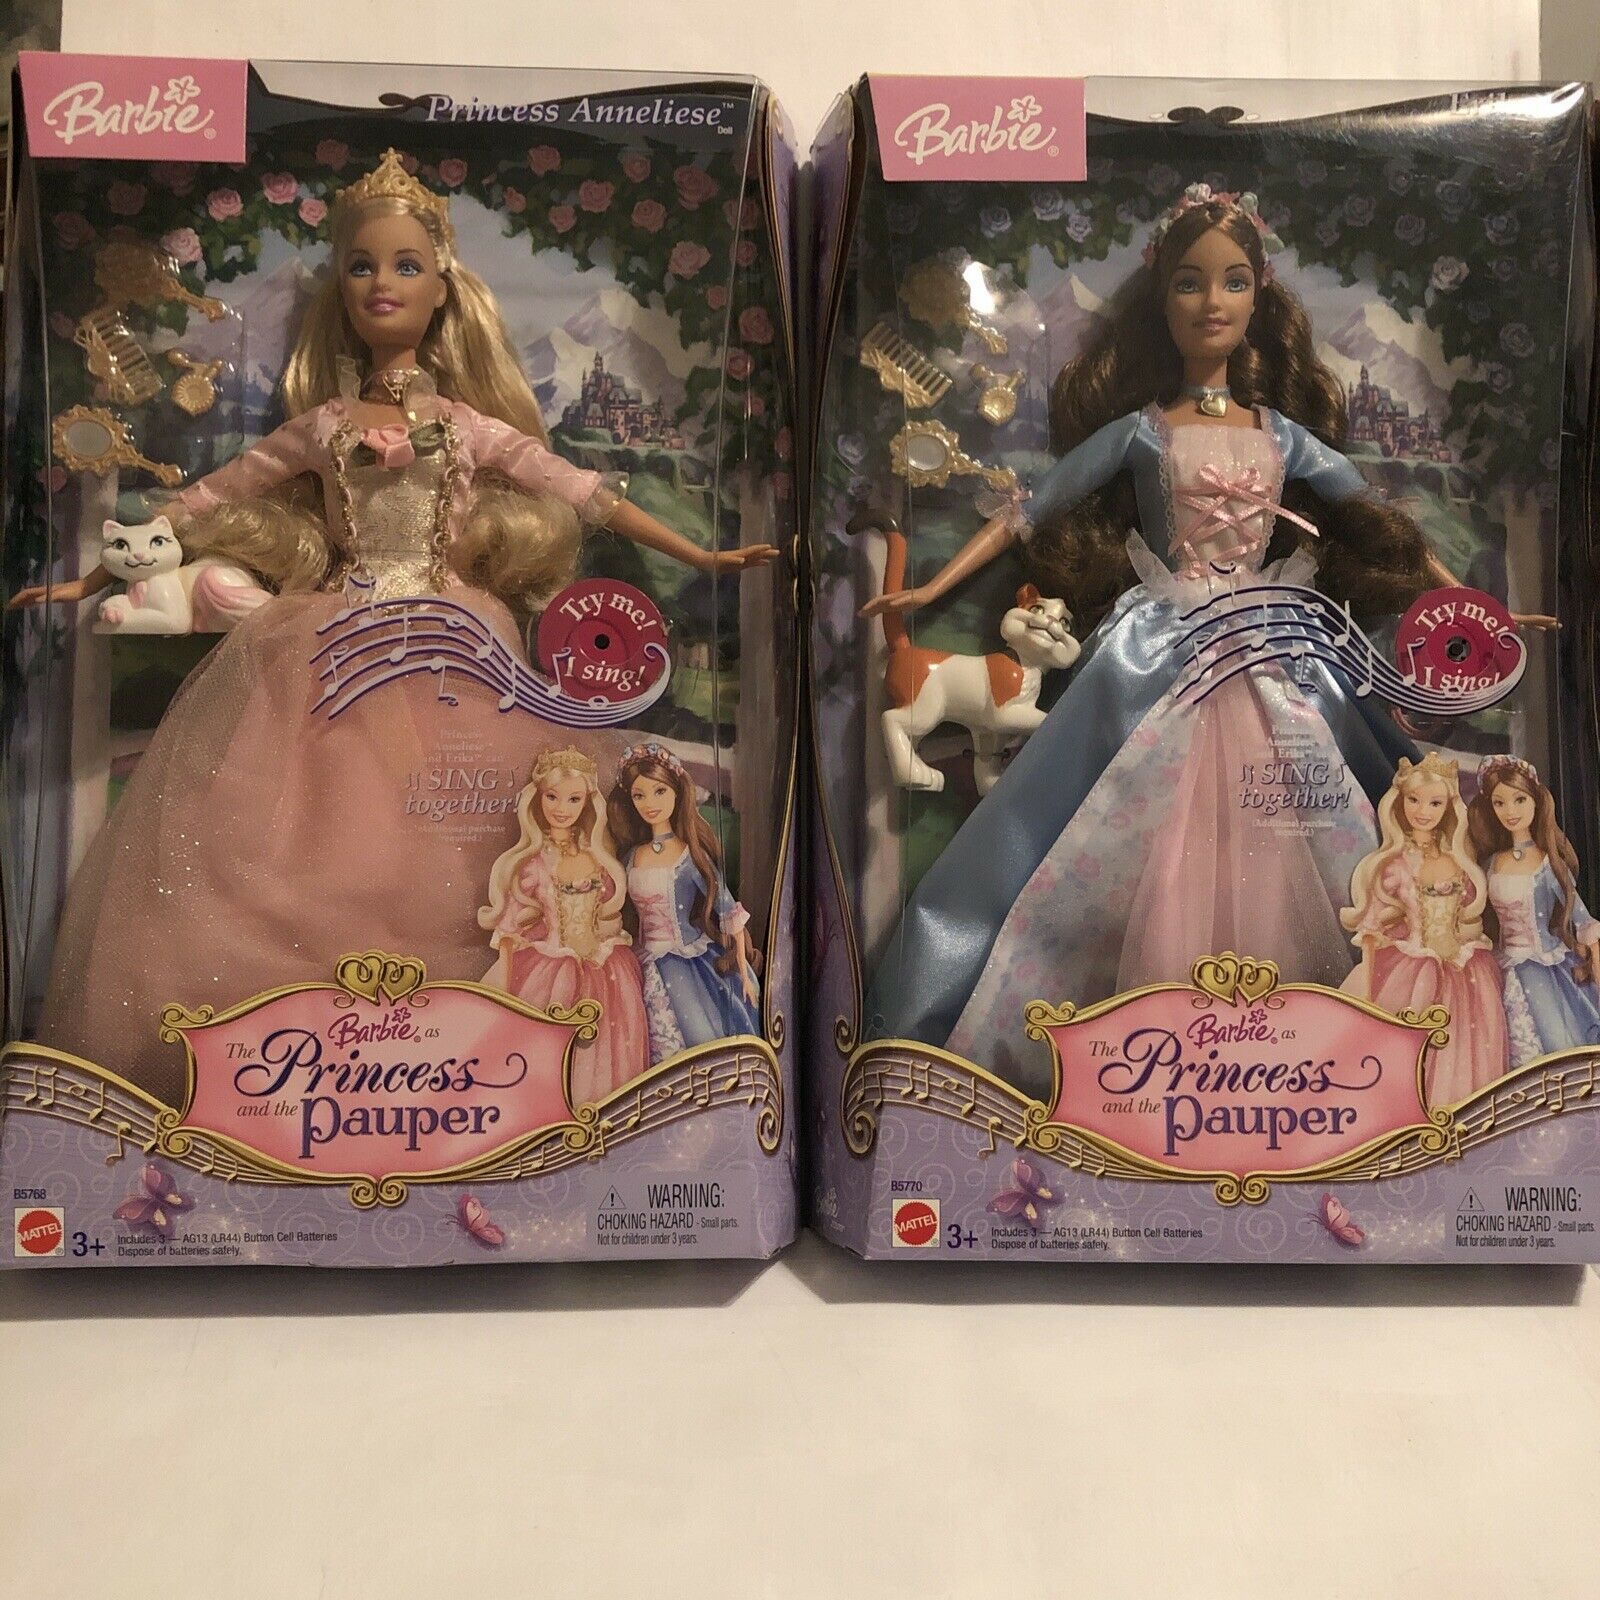 Princess Anneliese And Erika The Princess And The Pauper Lot 2 Rare Nib